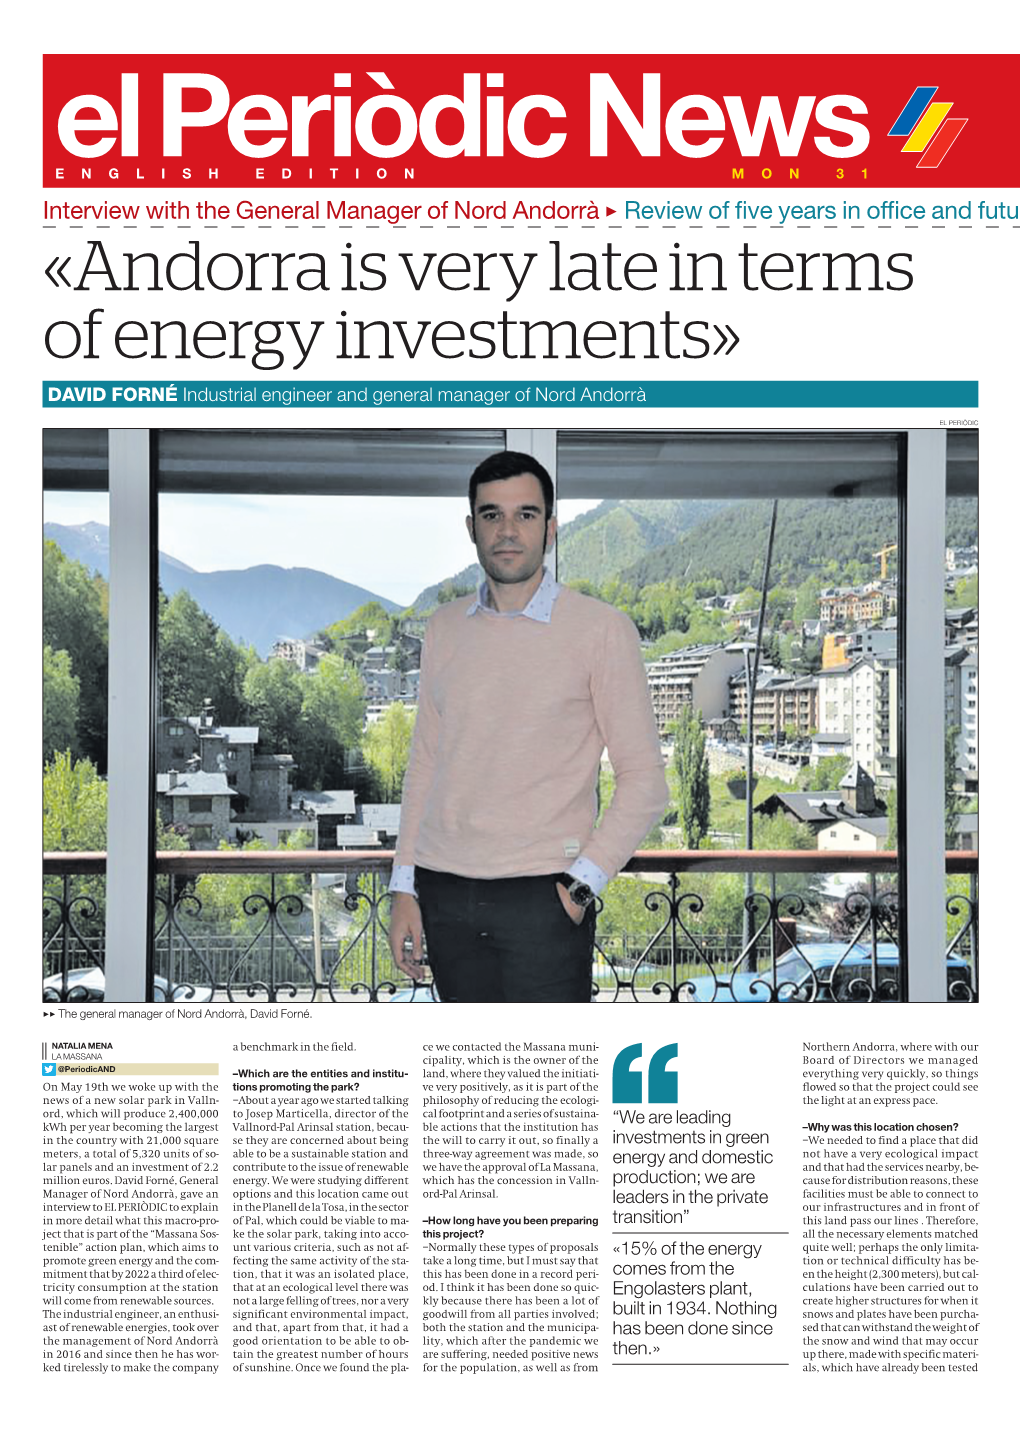 «Andorra Is Very Late in Terms of Energy Investments»